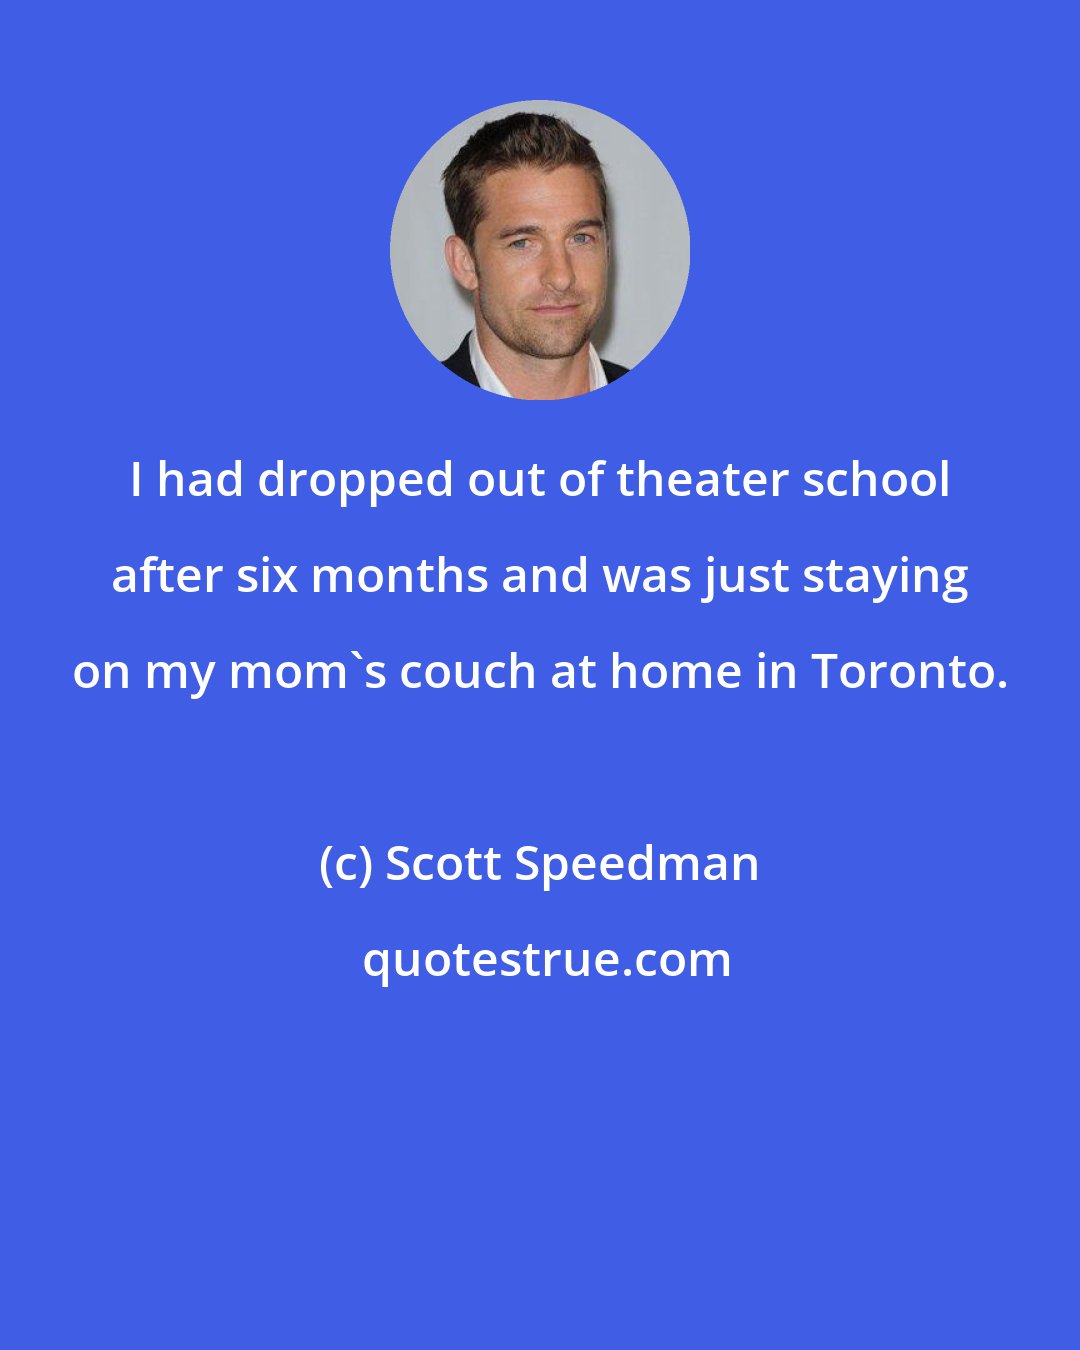 Scott Speedman: I had dropped out of theater school after six months and was just staying on my mom's couch at home in Toronto.